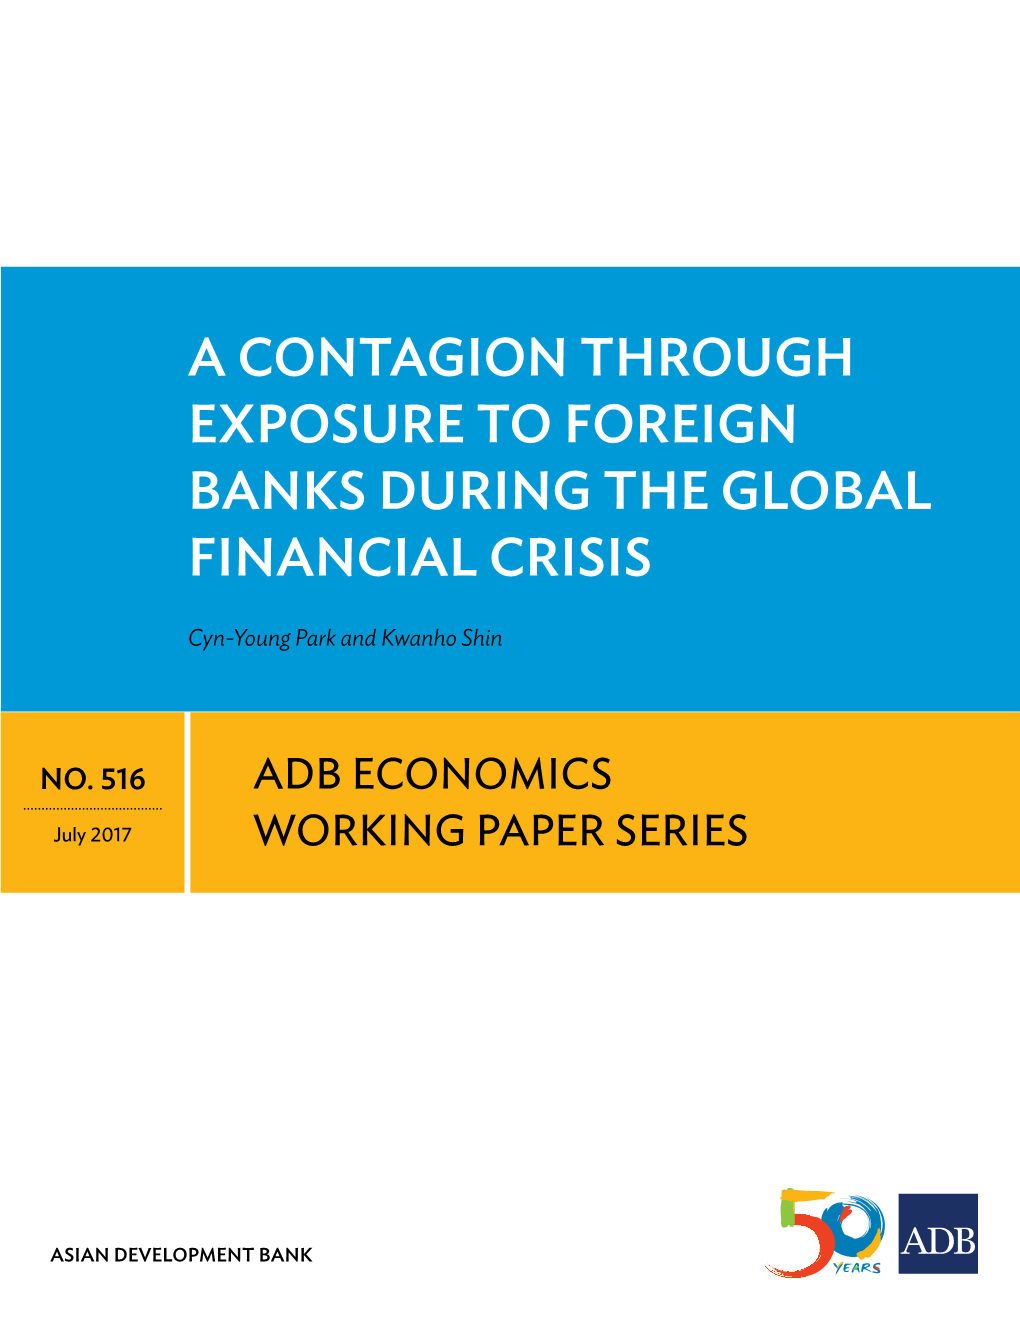 A Contagion Through Exposure to Foreign Banks During the Global Financial Crisis